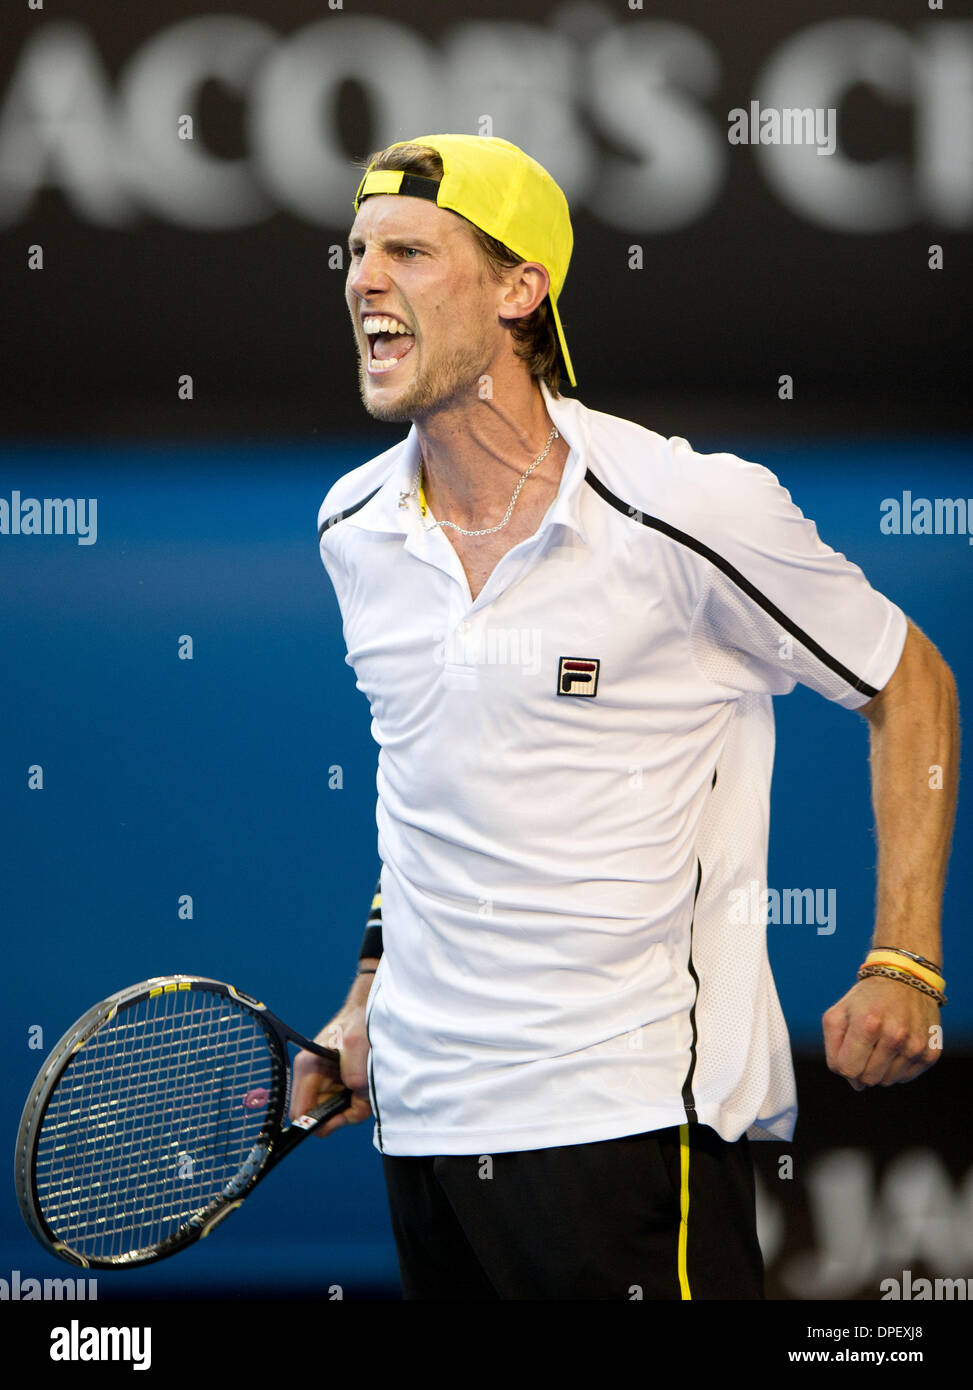 Melbourne, Australia. 14th Jan, 2014. Italy's Andreas Seppi celebrates  after his men's singles first round match against Australia's Lleyton  Hewitt in Melbourne, Australia, on Jan. 14, 2014. Seppi won 3-2. Credit: Bai